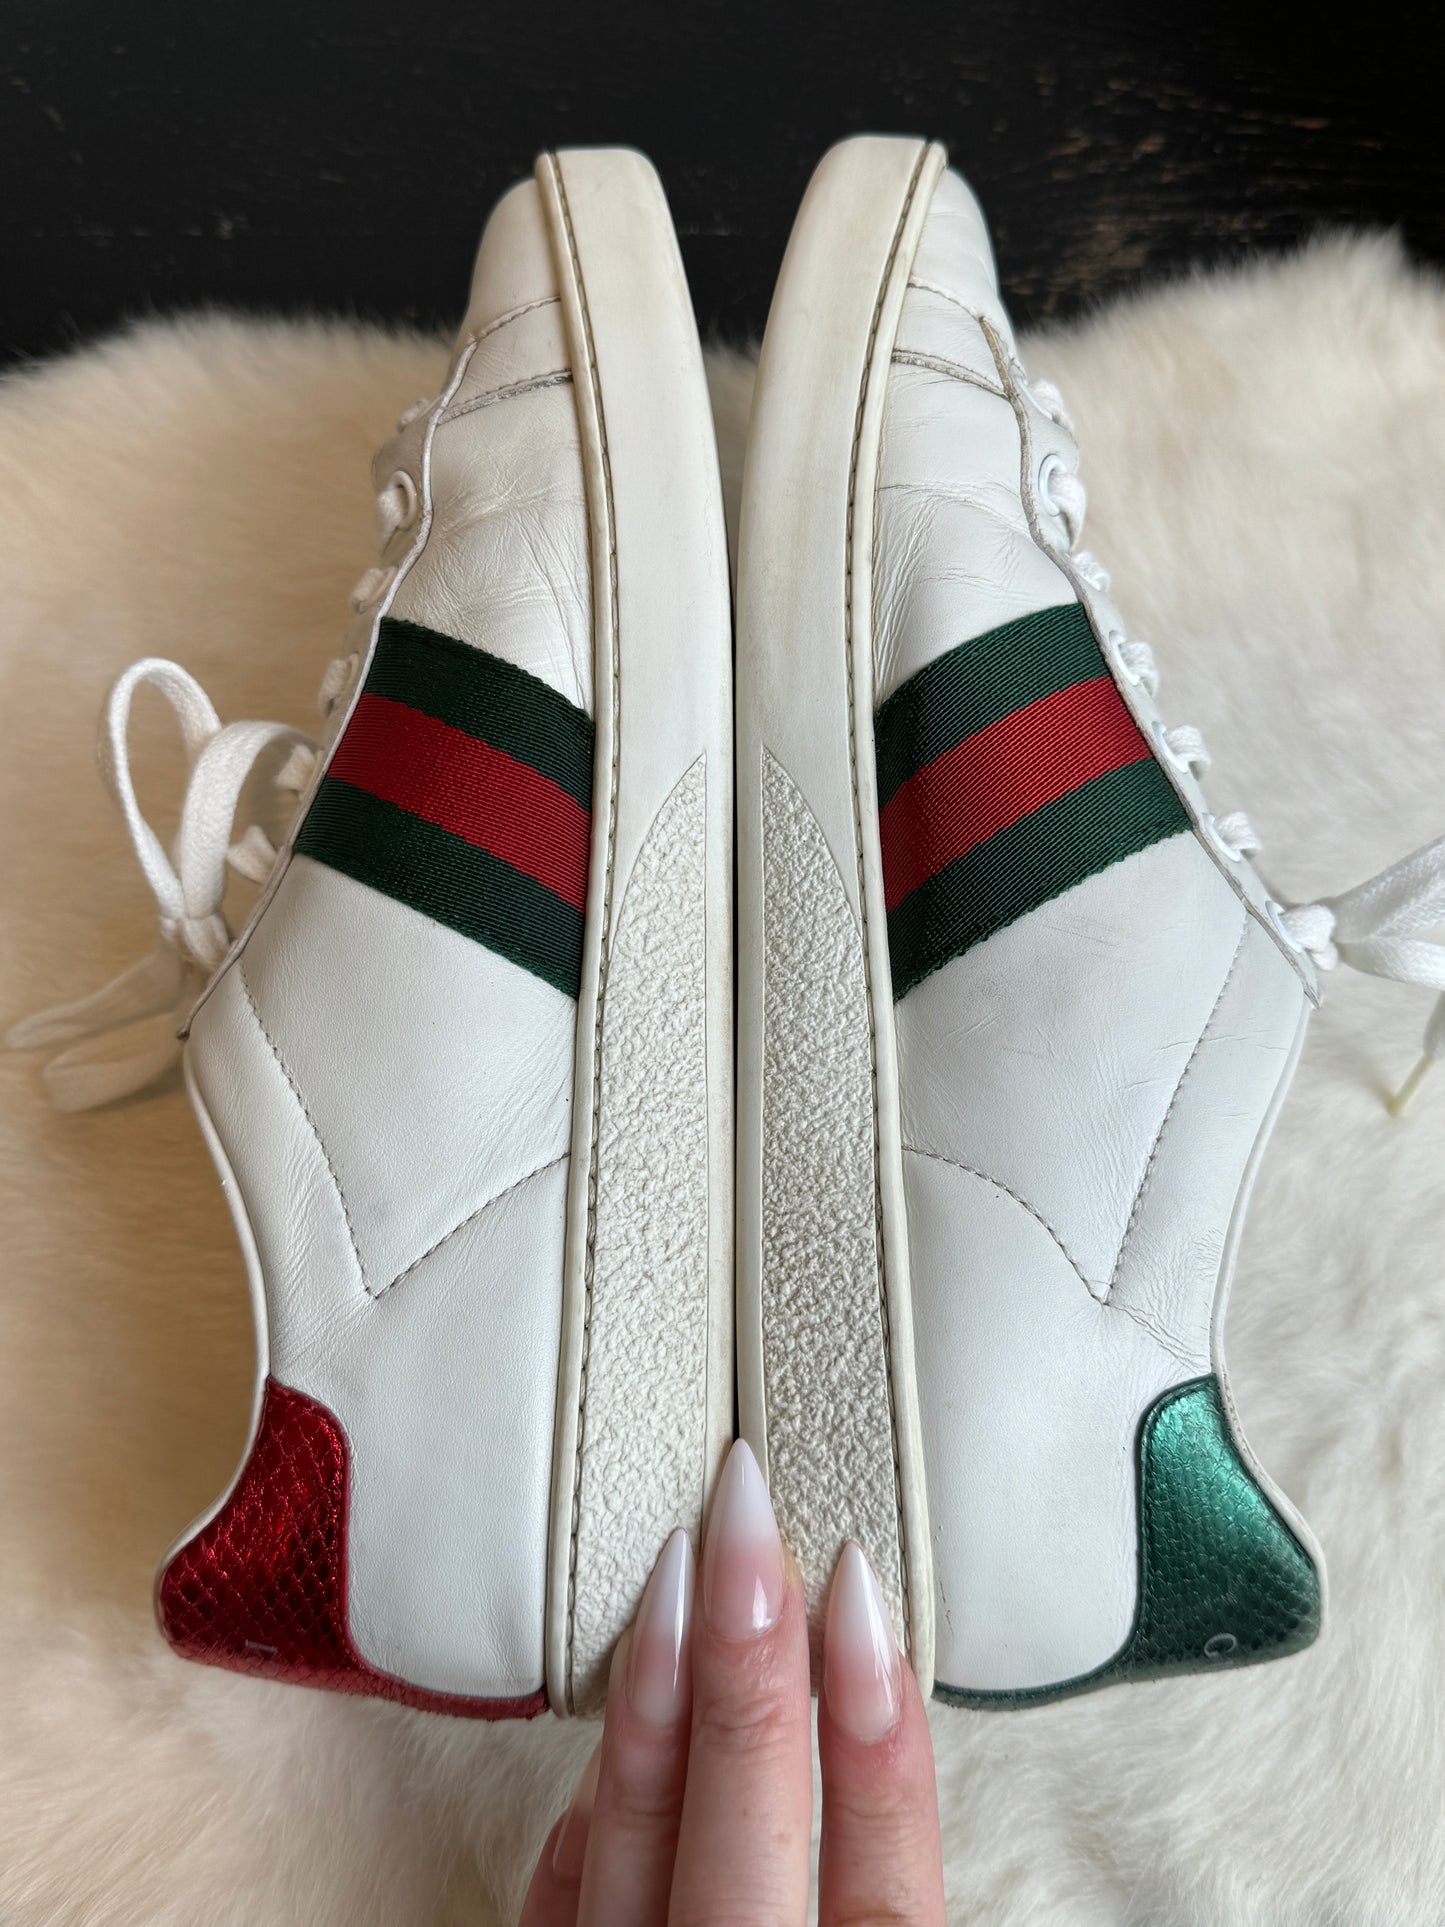 Gucci Ace Bees Sneakers Size 36.5EU